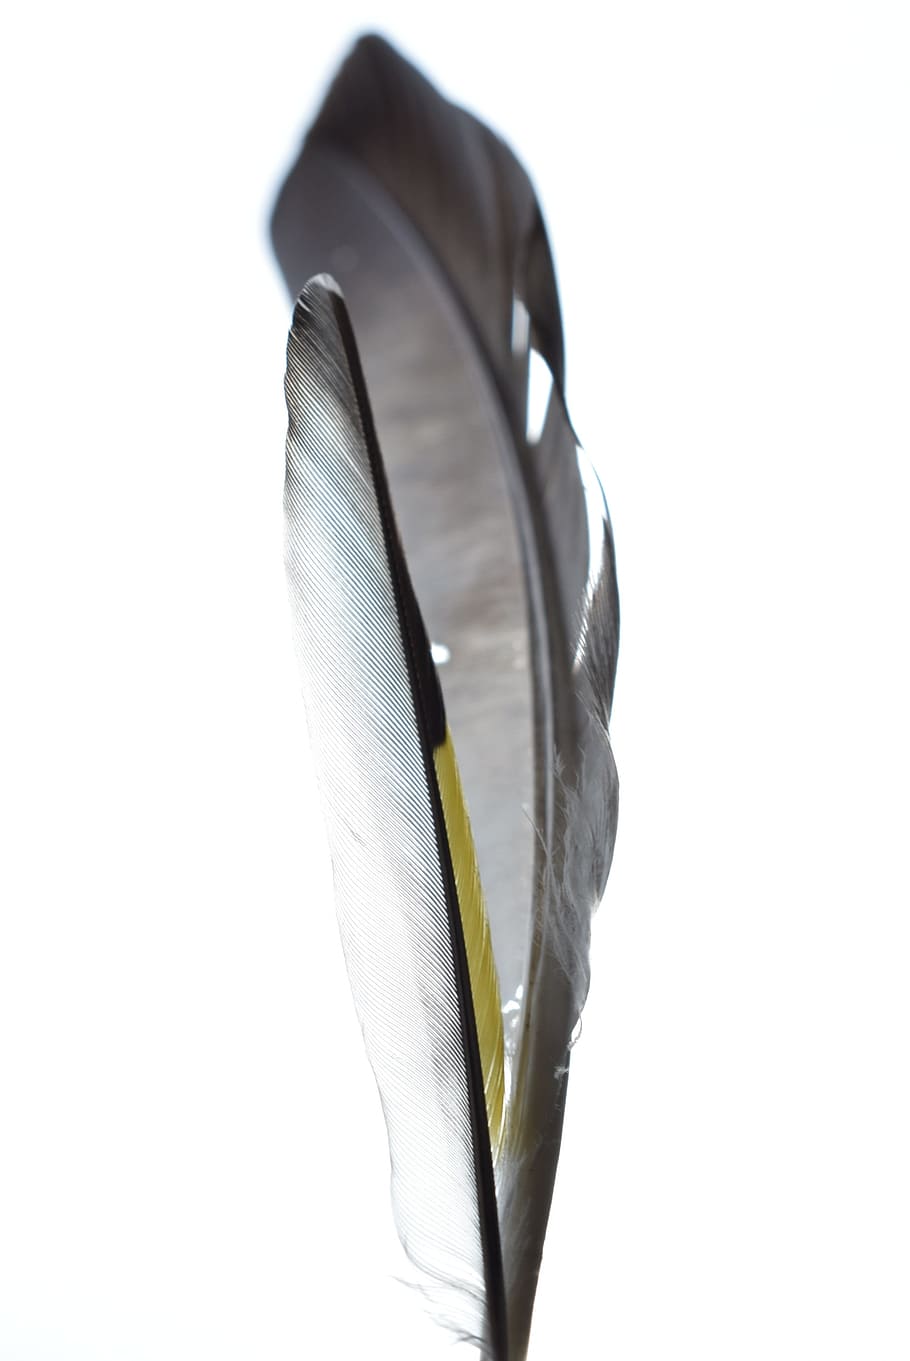 feather, bird, nature, wing, natural, fly, color, animal, white, studio shot